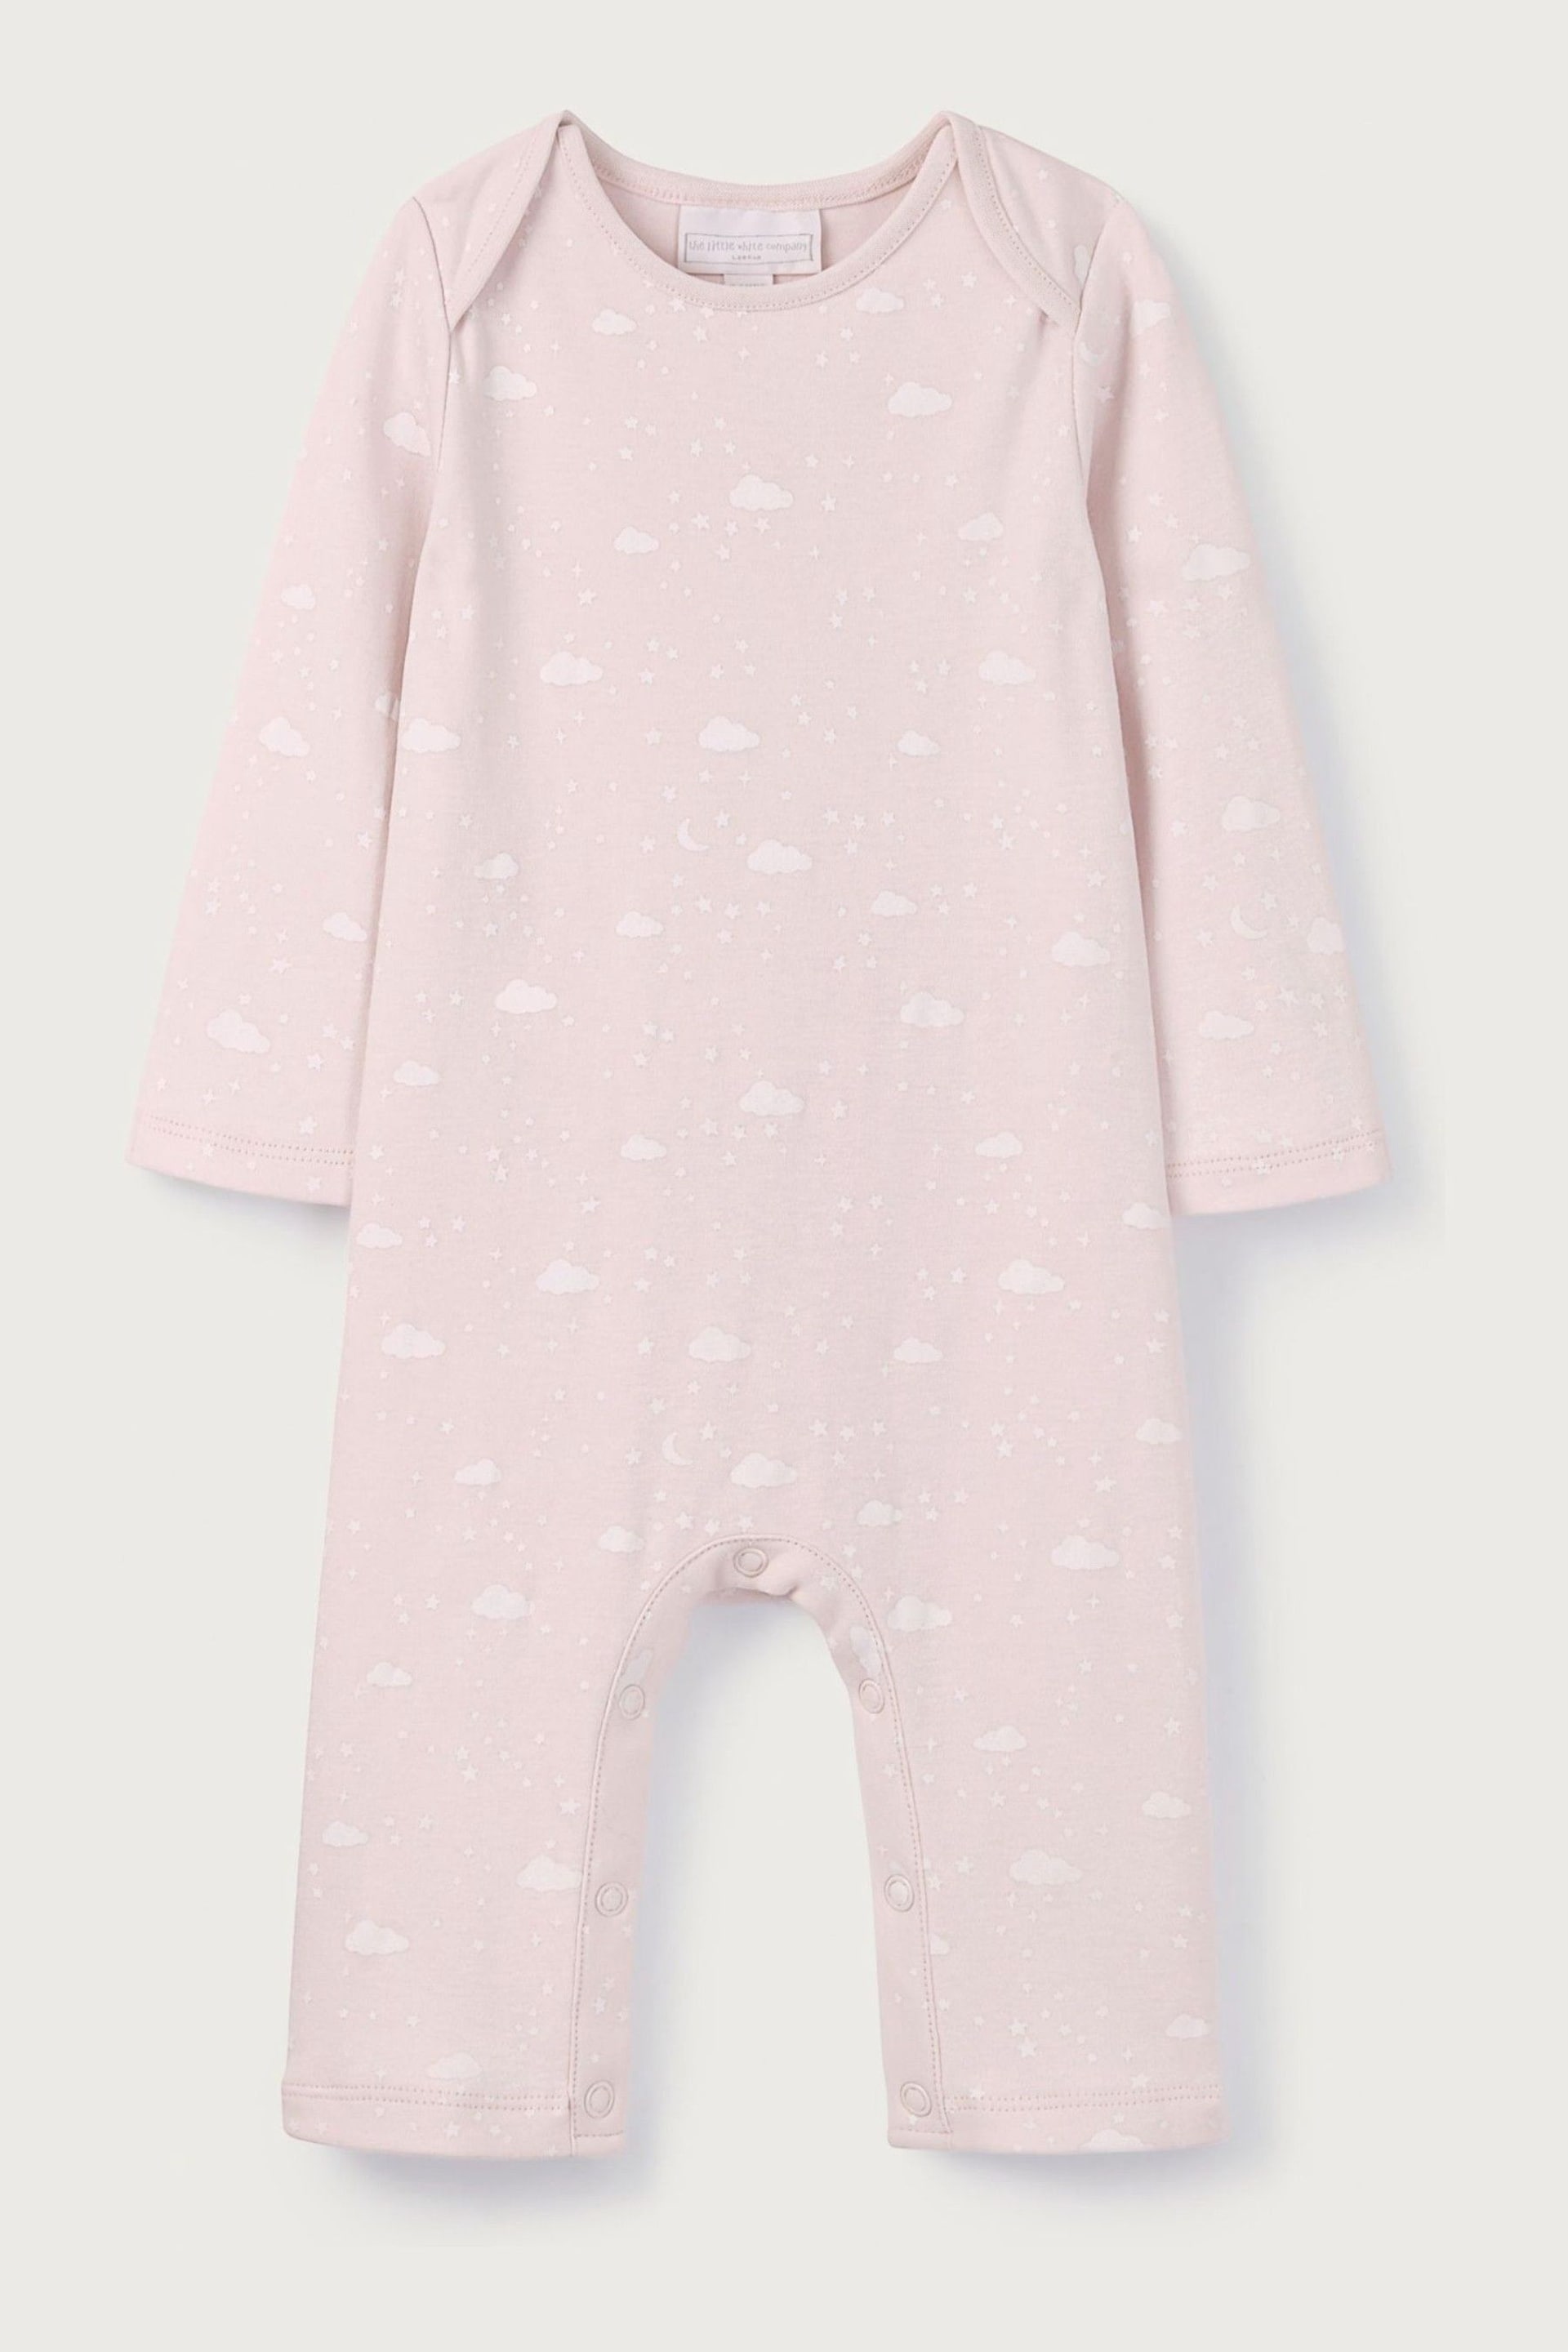 The White Company Pink Organic Cotton Cloud Print Sleepsuit - Image 4 of 5